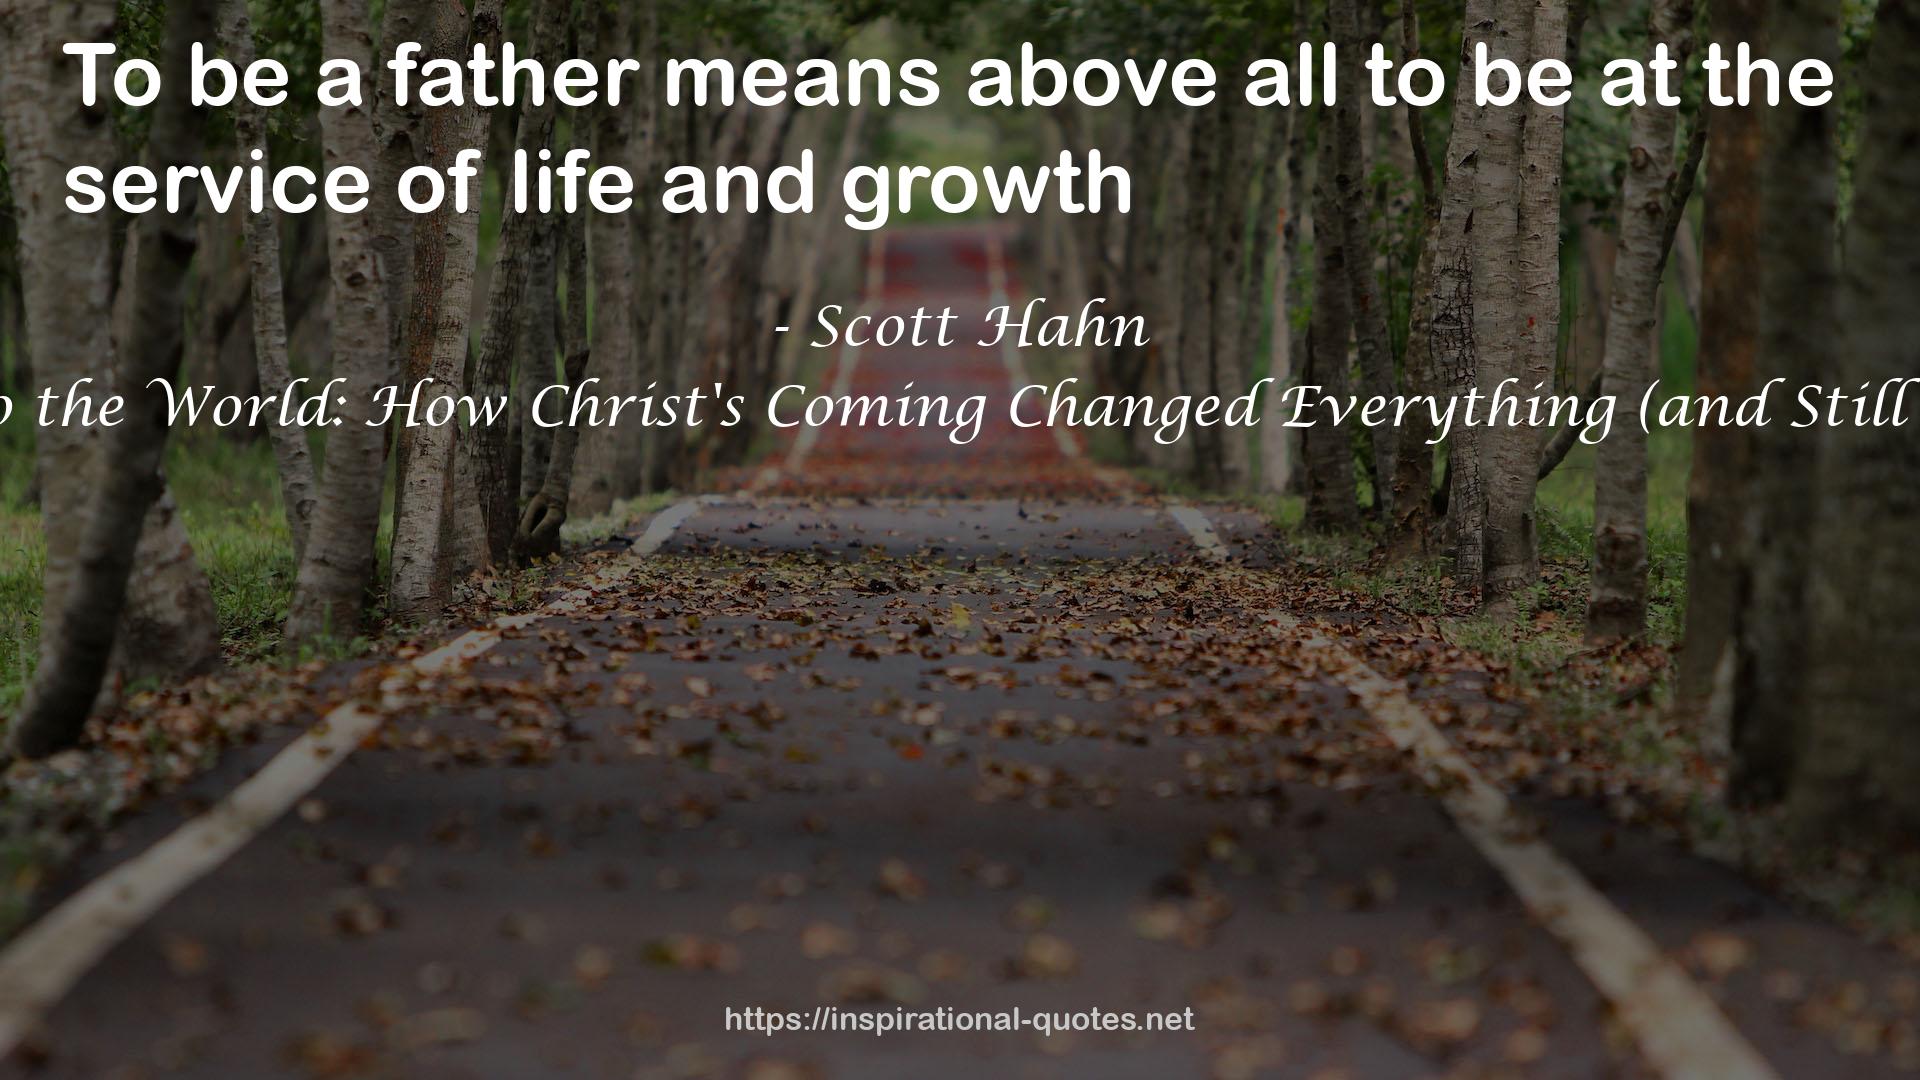 Joy to the World: How Christ's Coming Changed Everything (and Still Does) QUOTES